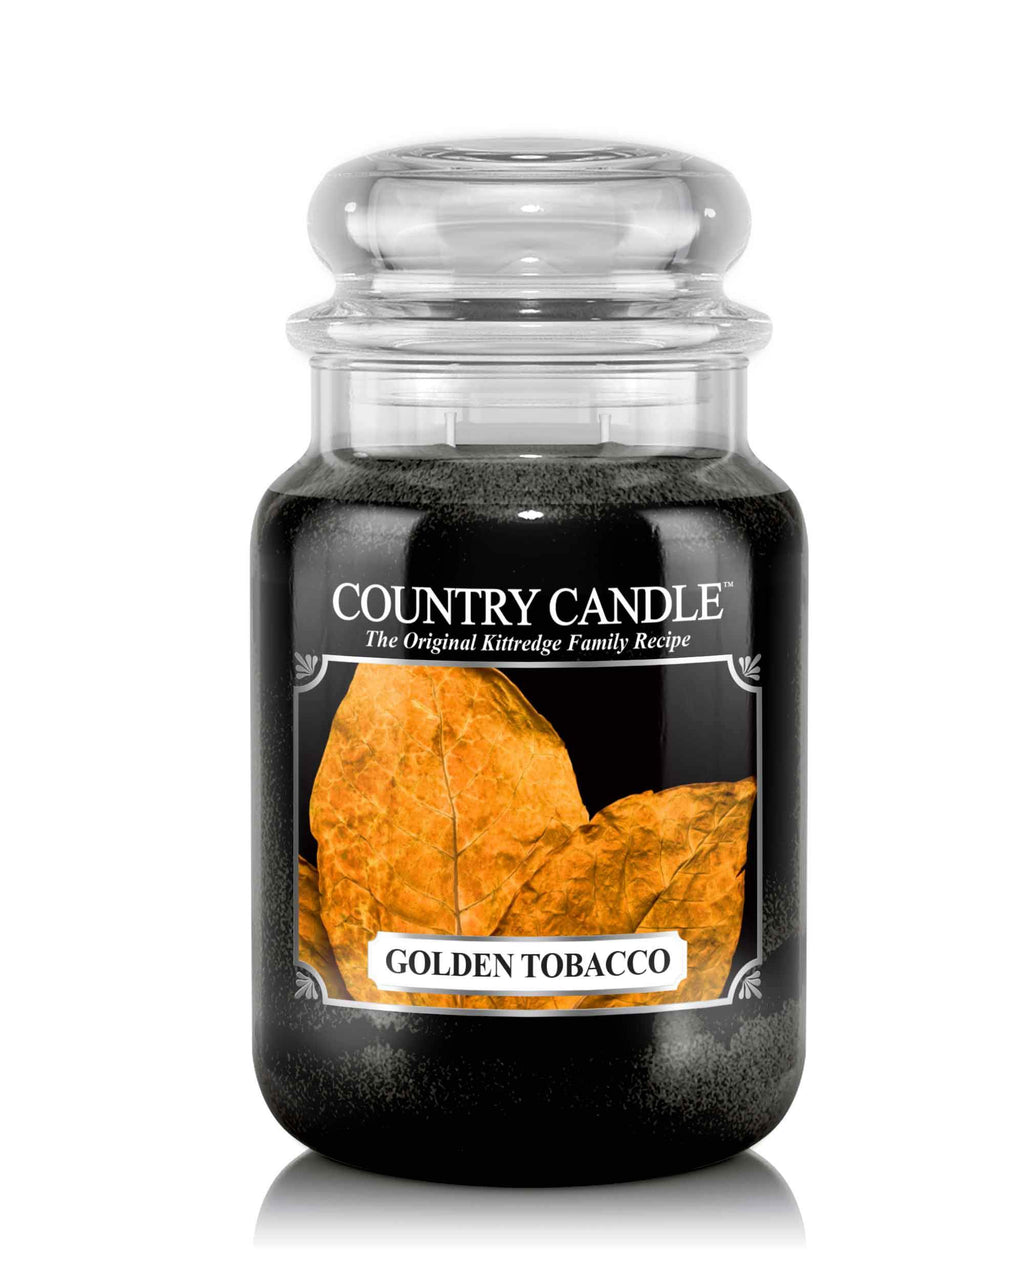 Golden Tobacco New! - Kringle Candle Store